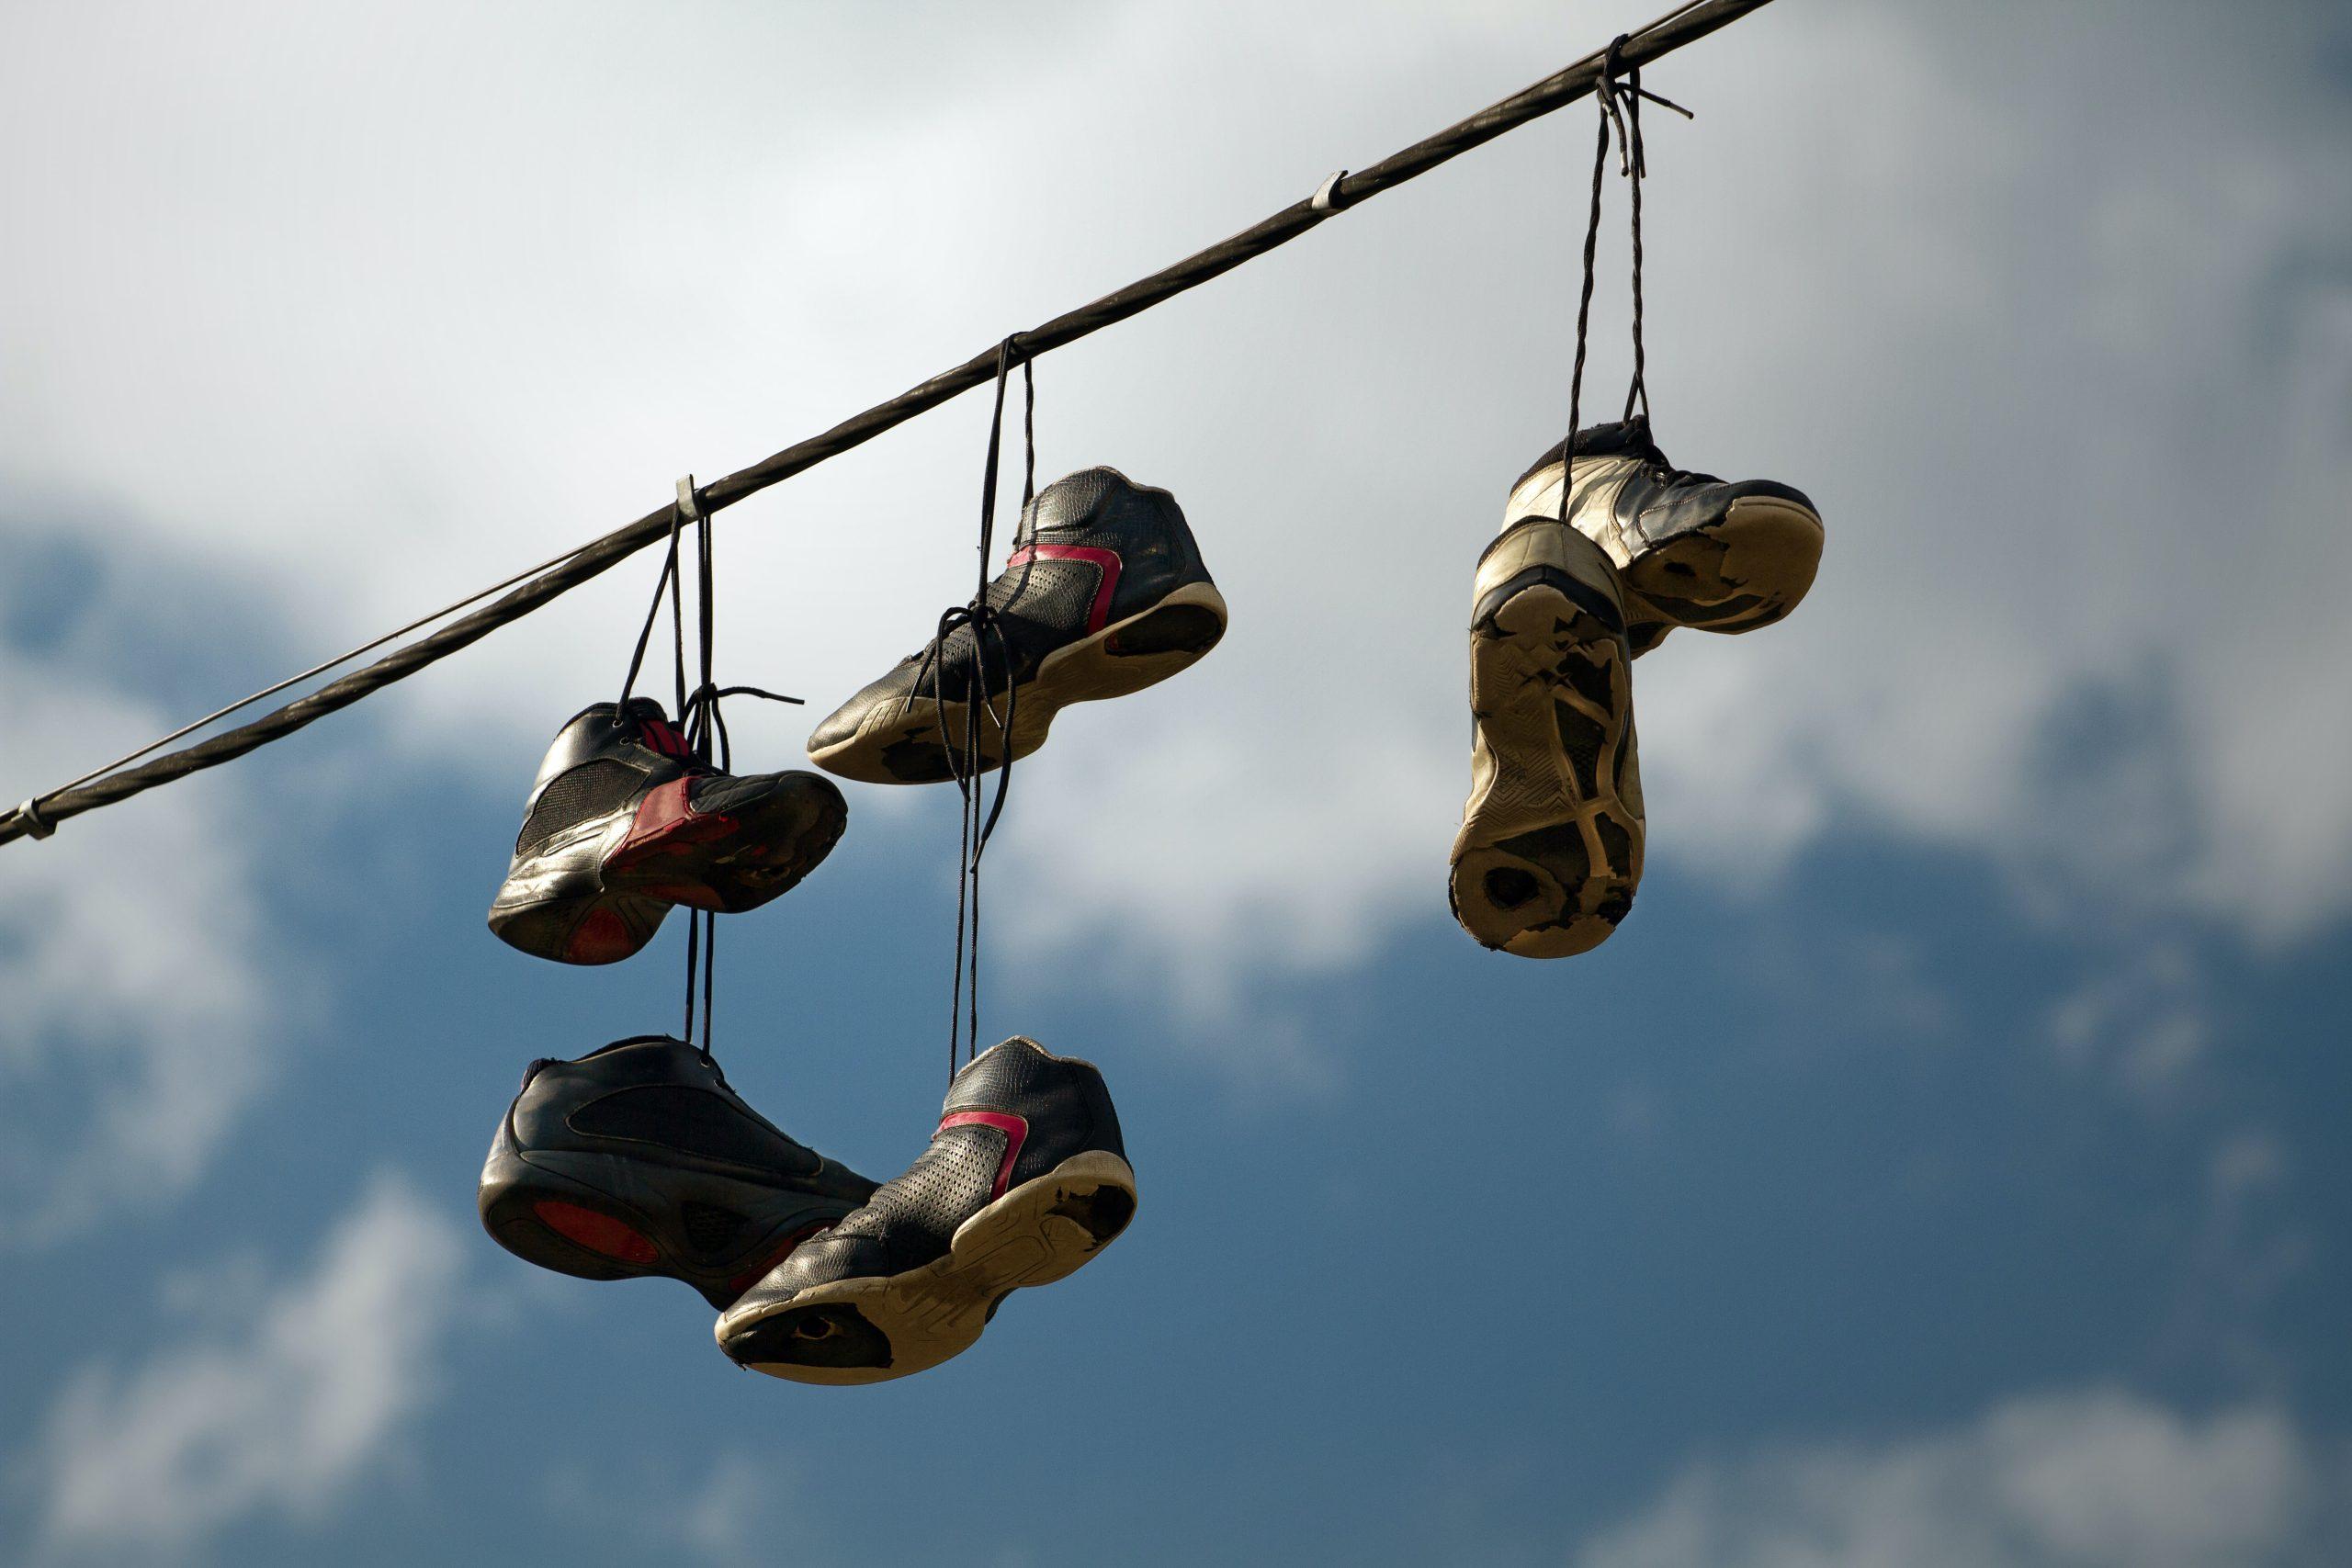 10 Lessons for Scaling on a Shoestring